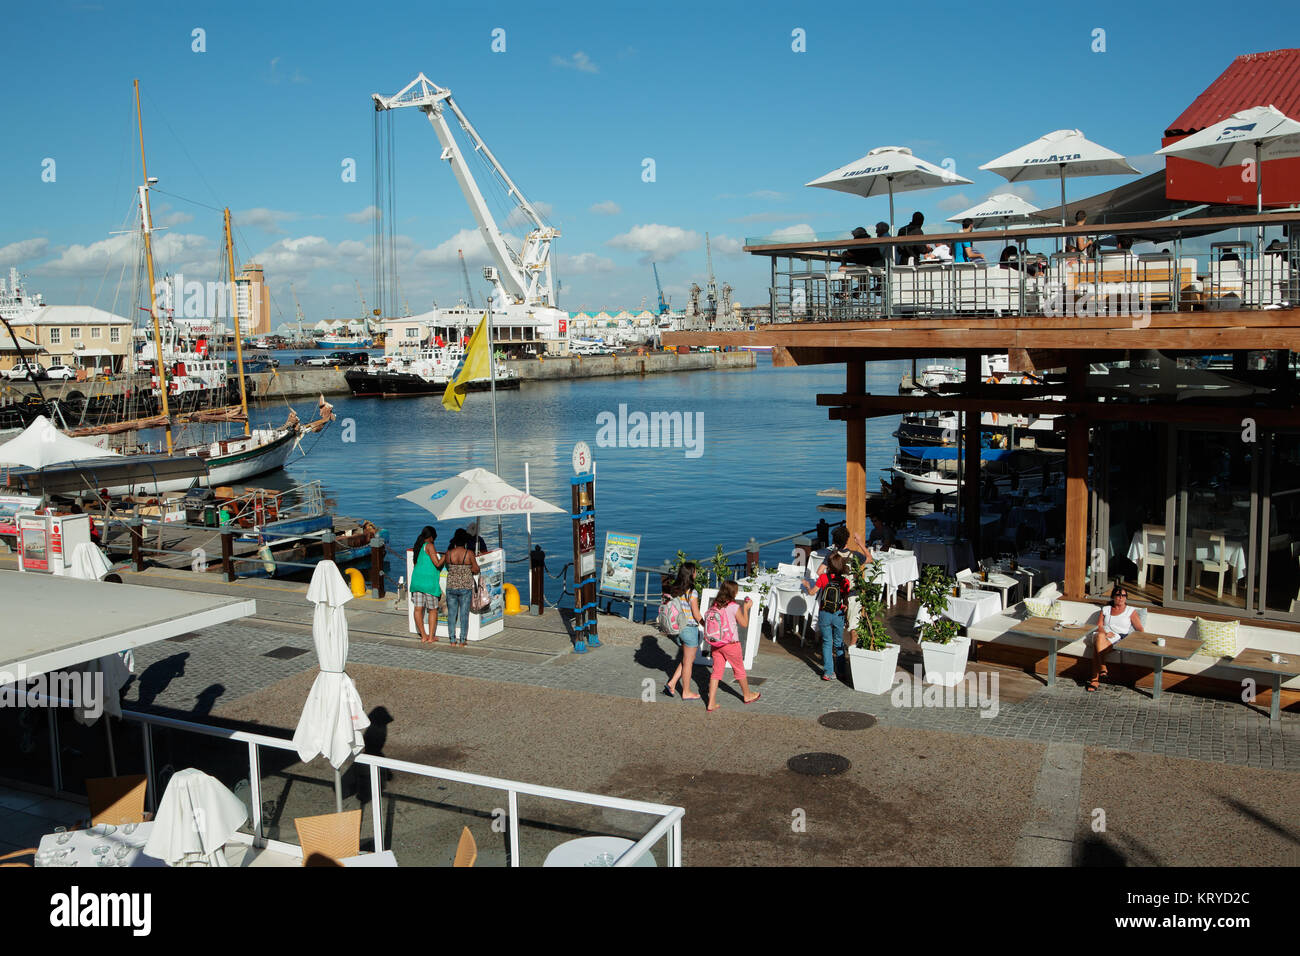 CAPE TOWN, SOUTH AFRICA - FEBRUARY 20, 2012: Victoria and Alfred Waterfront, harbor with shops, restaurants and boats popular with tourists. Stock Photo